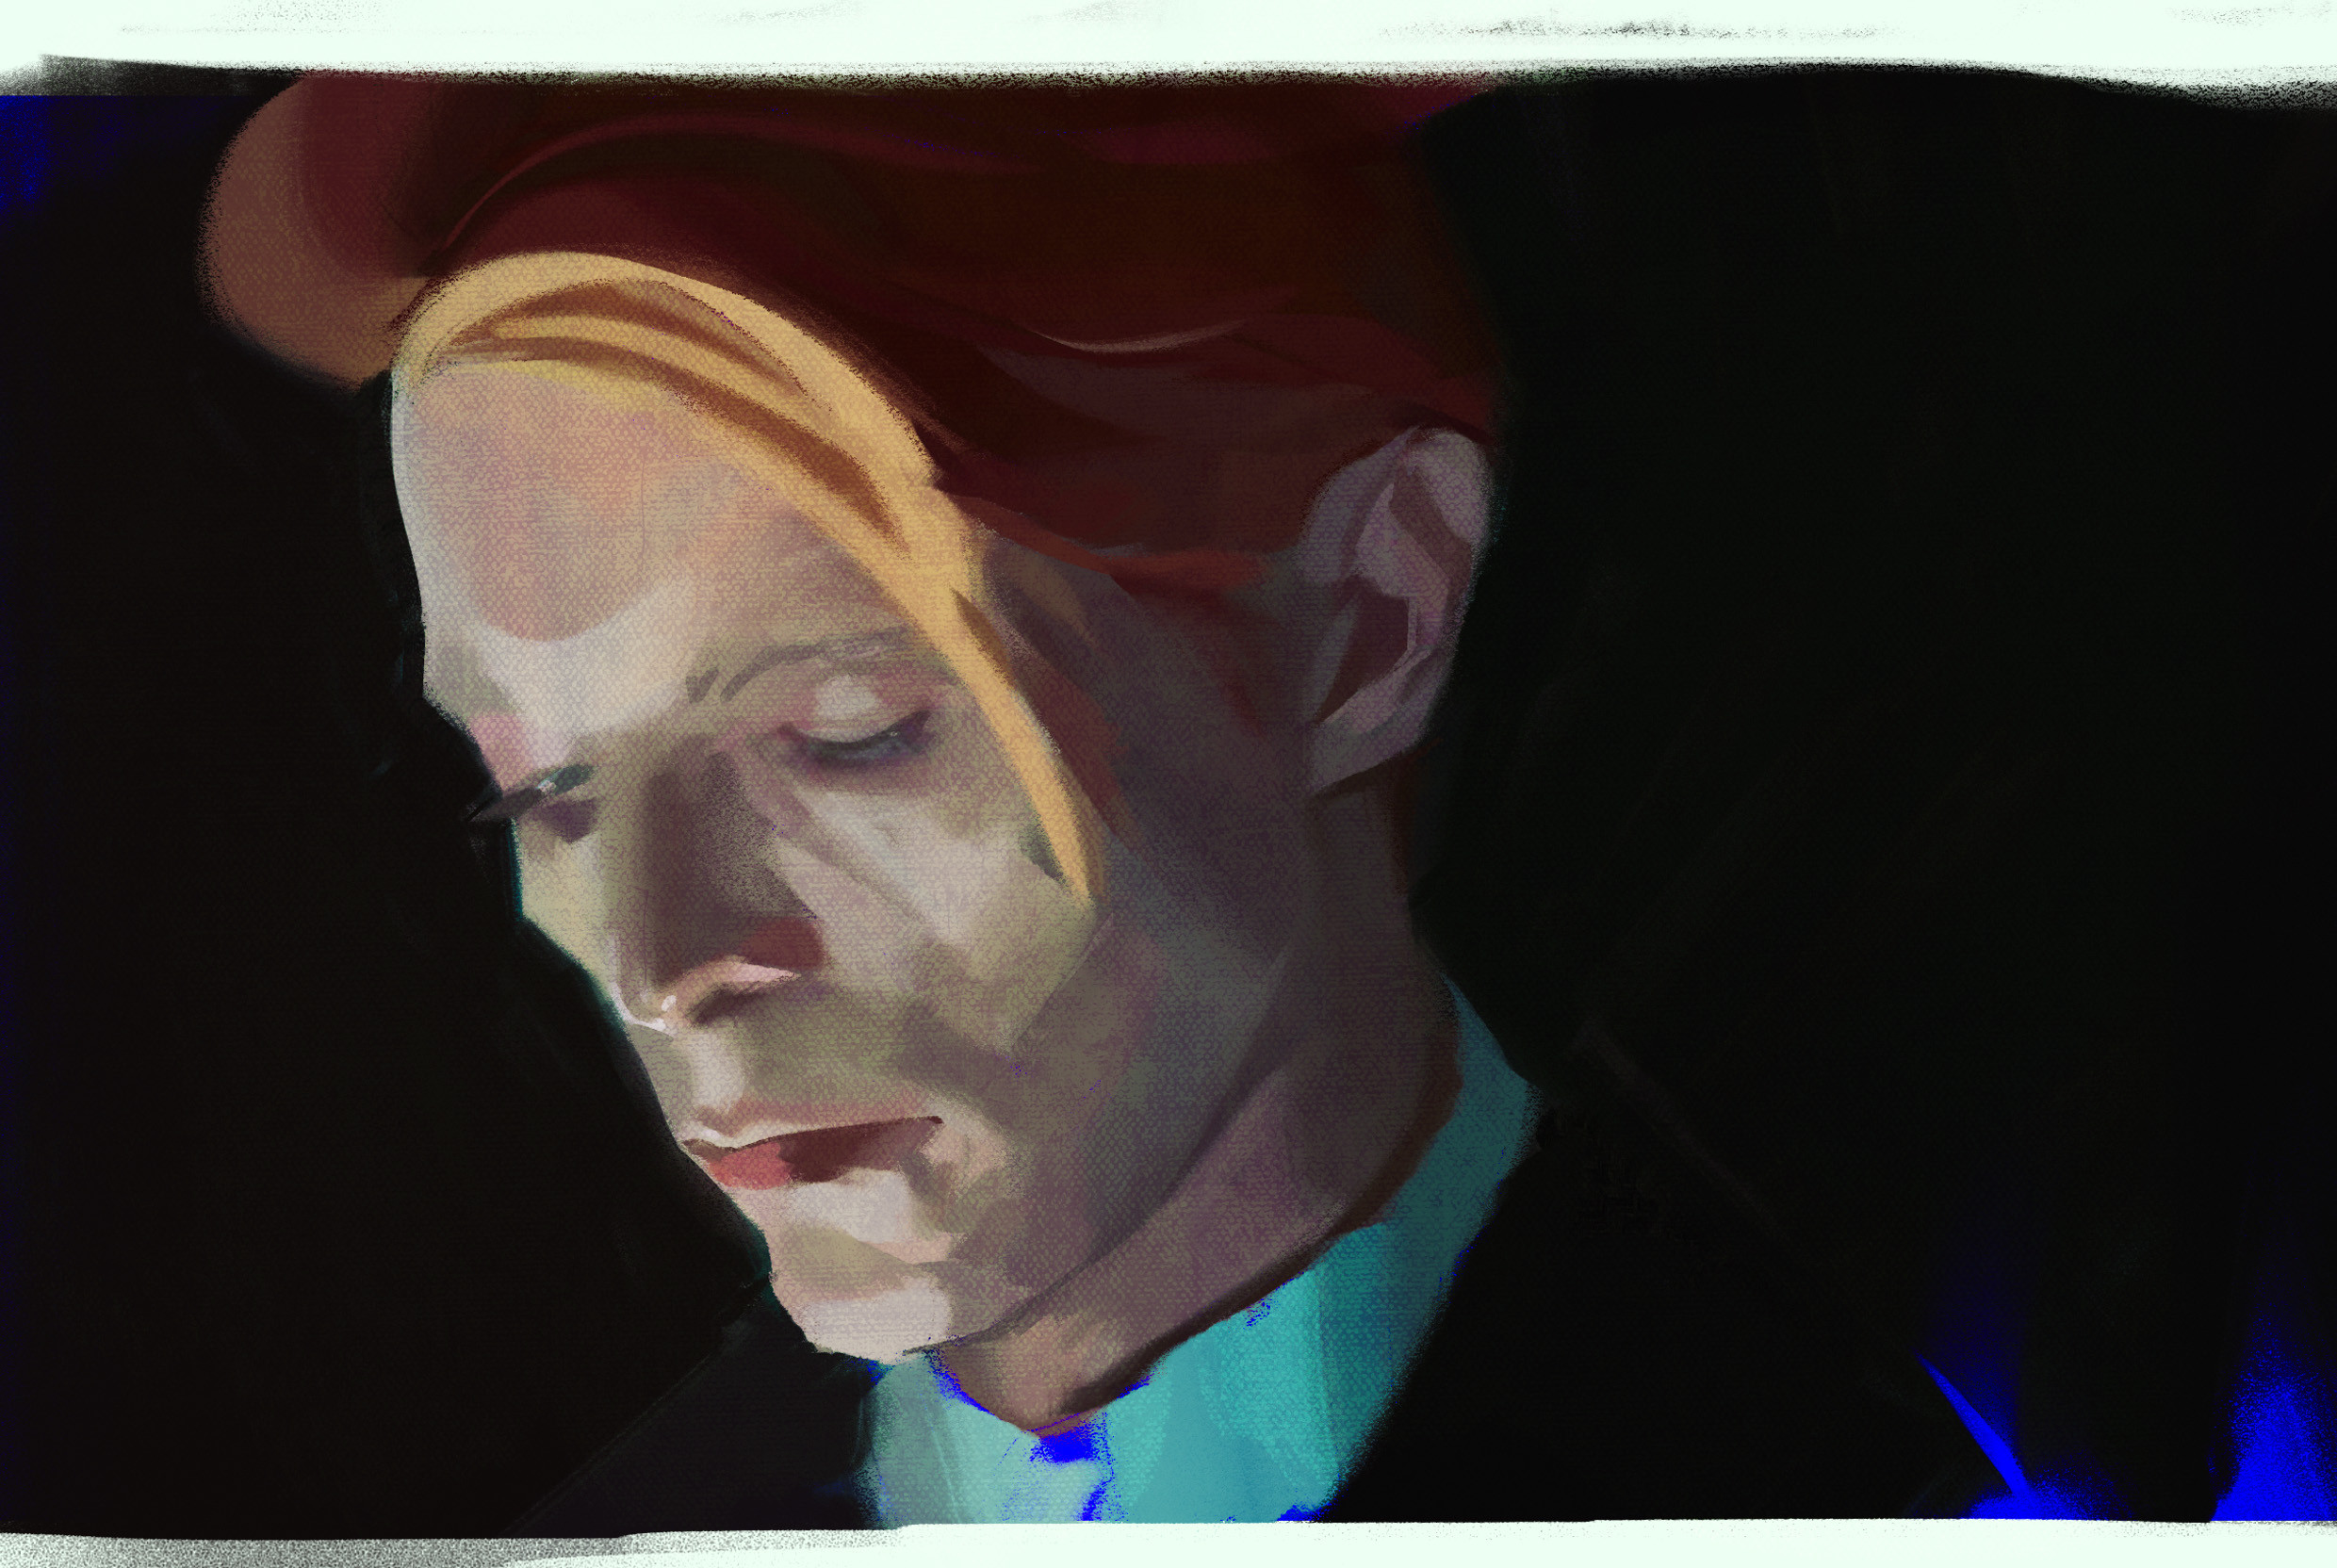 David Bowie / The man who fell to earth